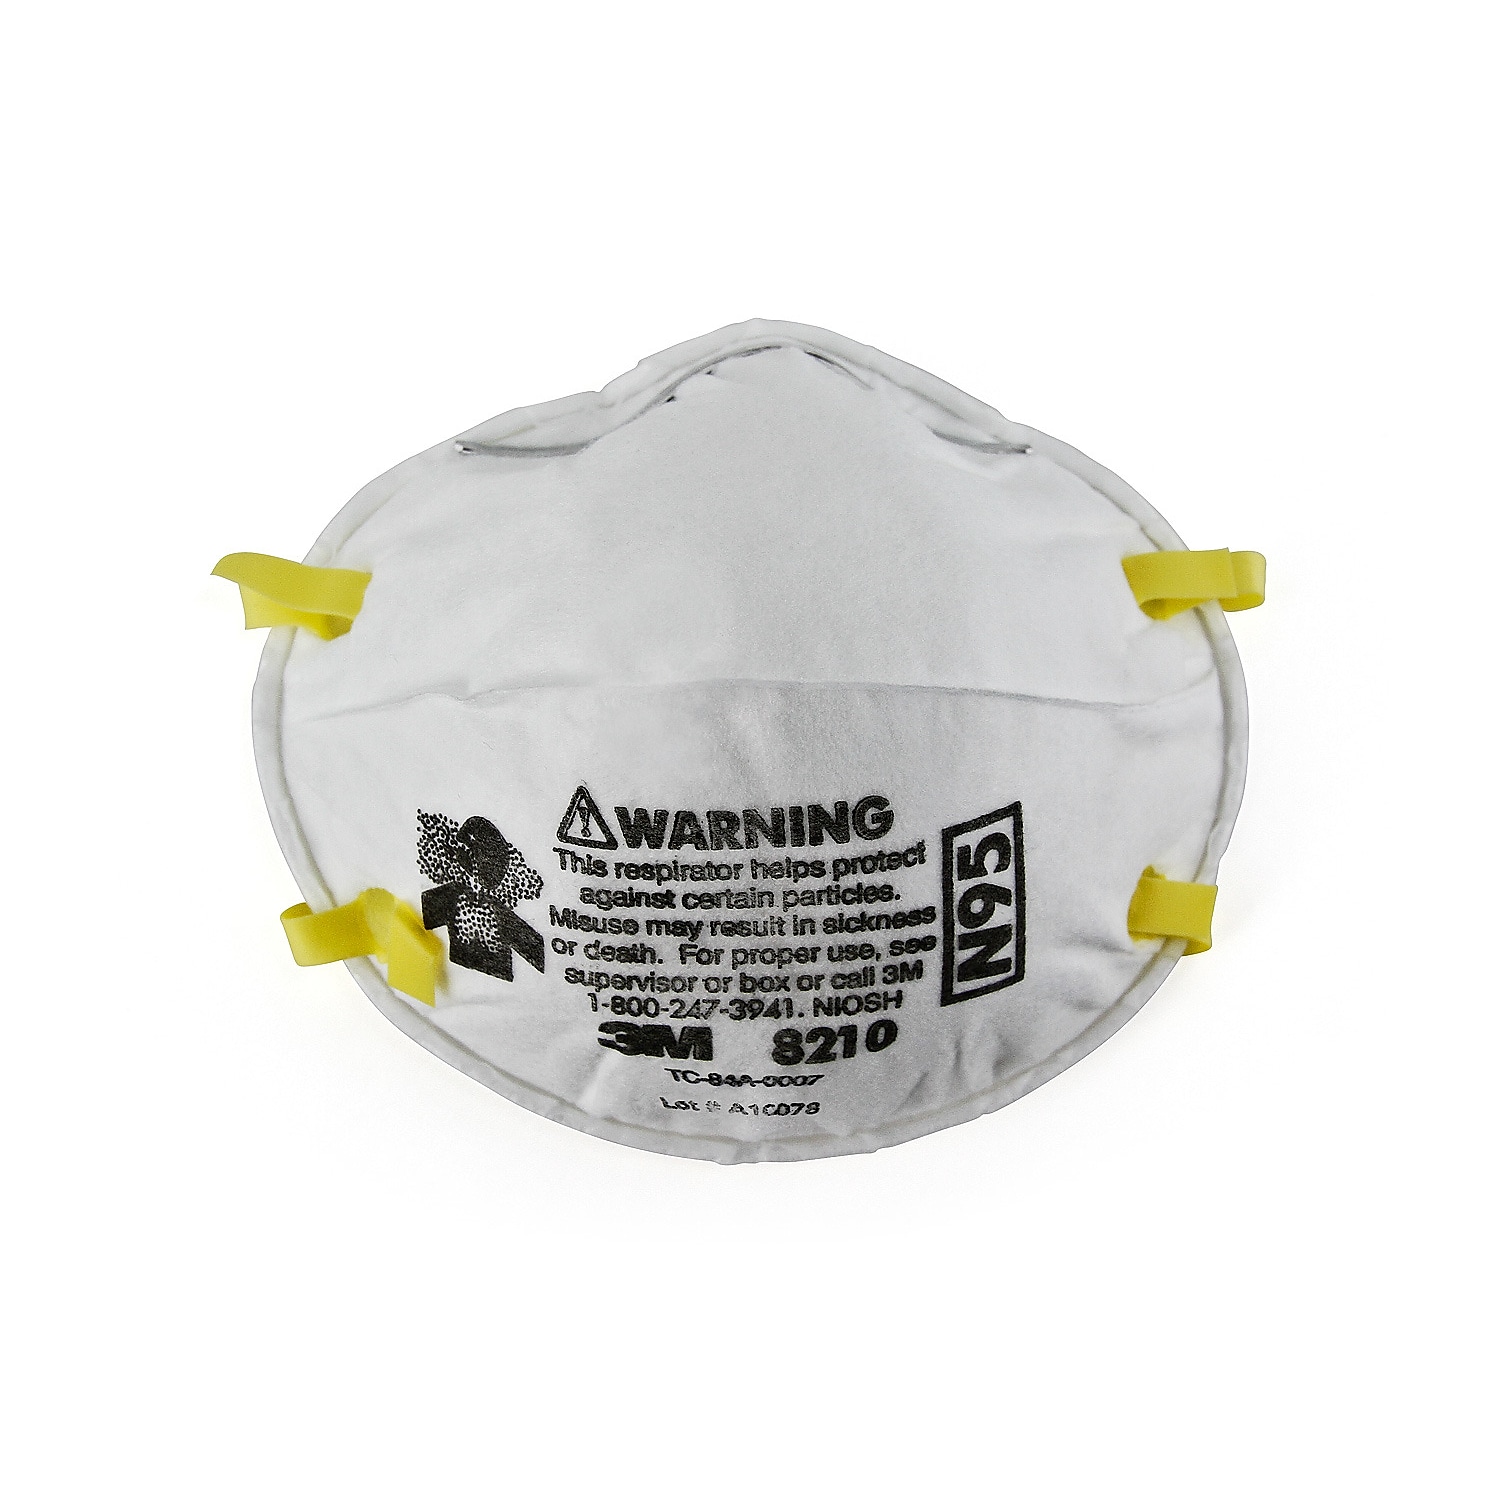 3M™ Disposable Particulate Respirator N95, 20/Pack (8210) @ Staples $18.99 (YMMV, in stock for some zip codes)